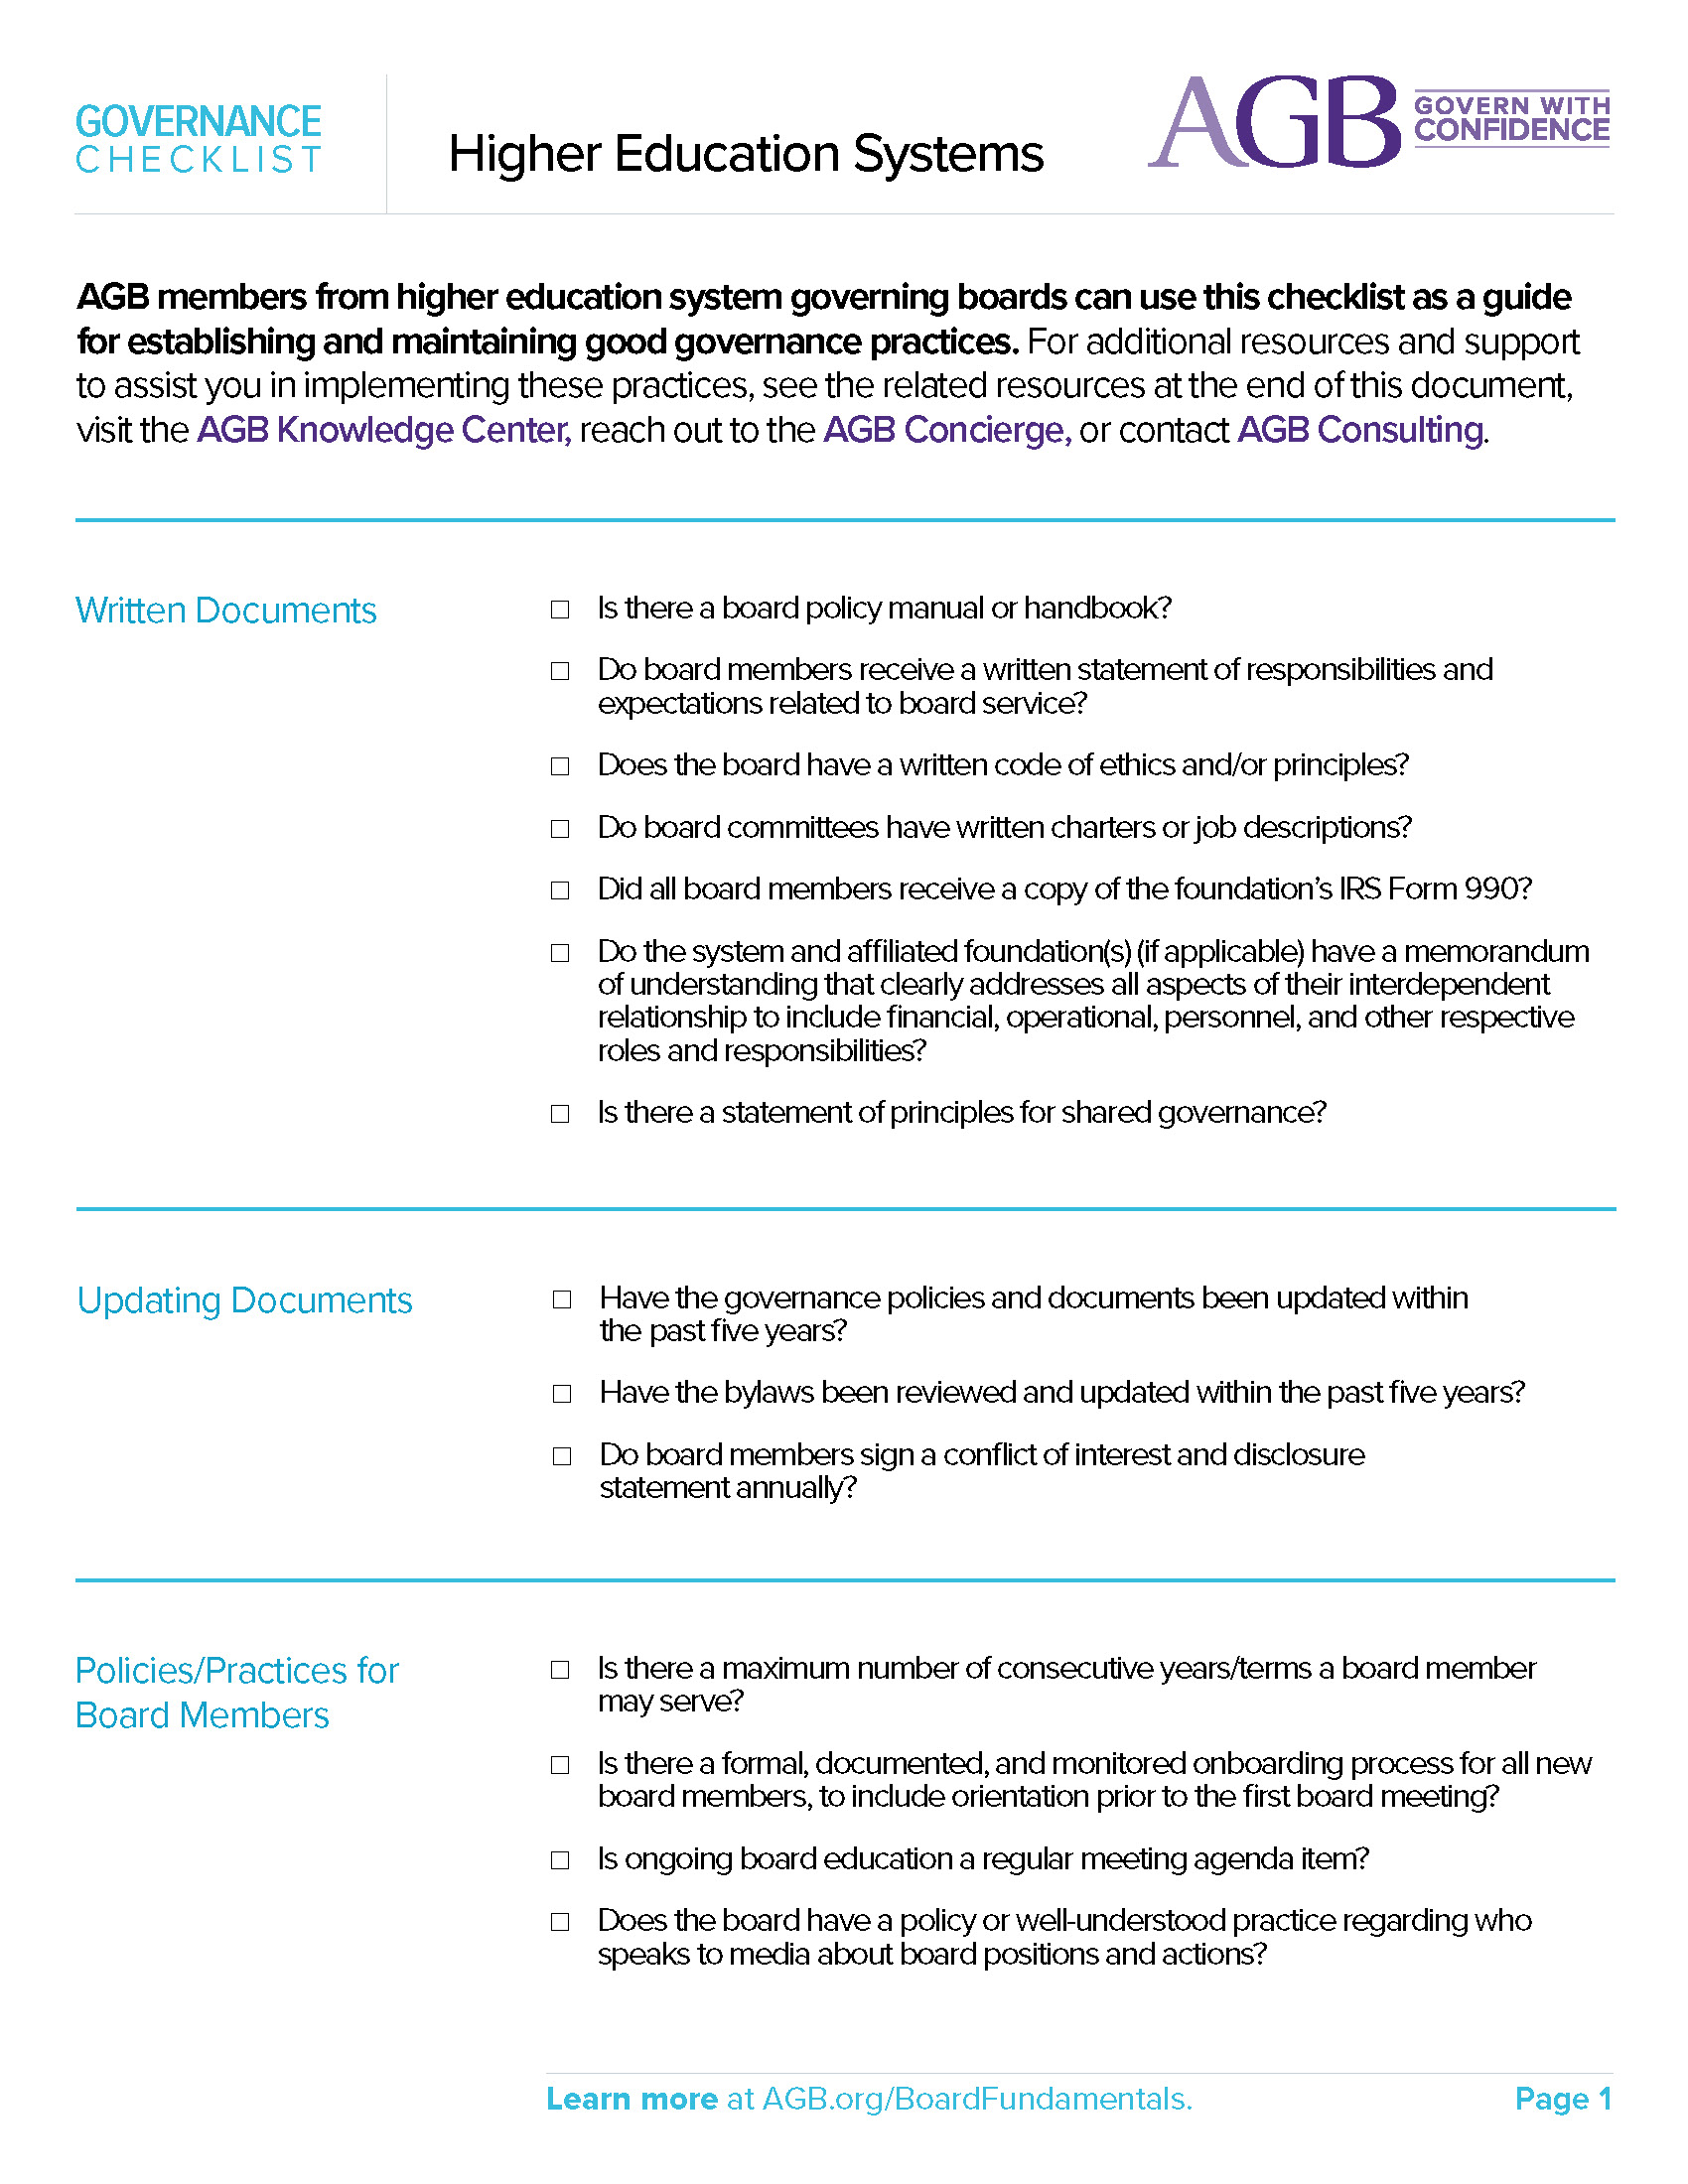 AGB Consulting's Higher Education Systems Governance Checklist